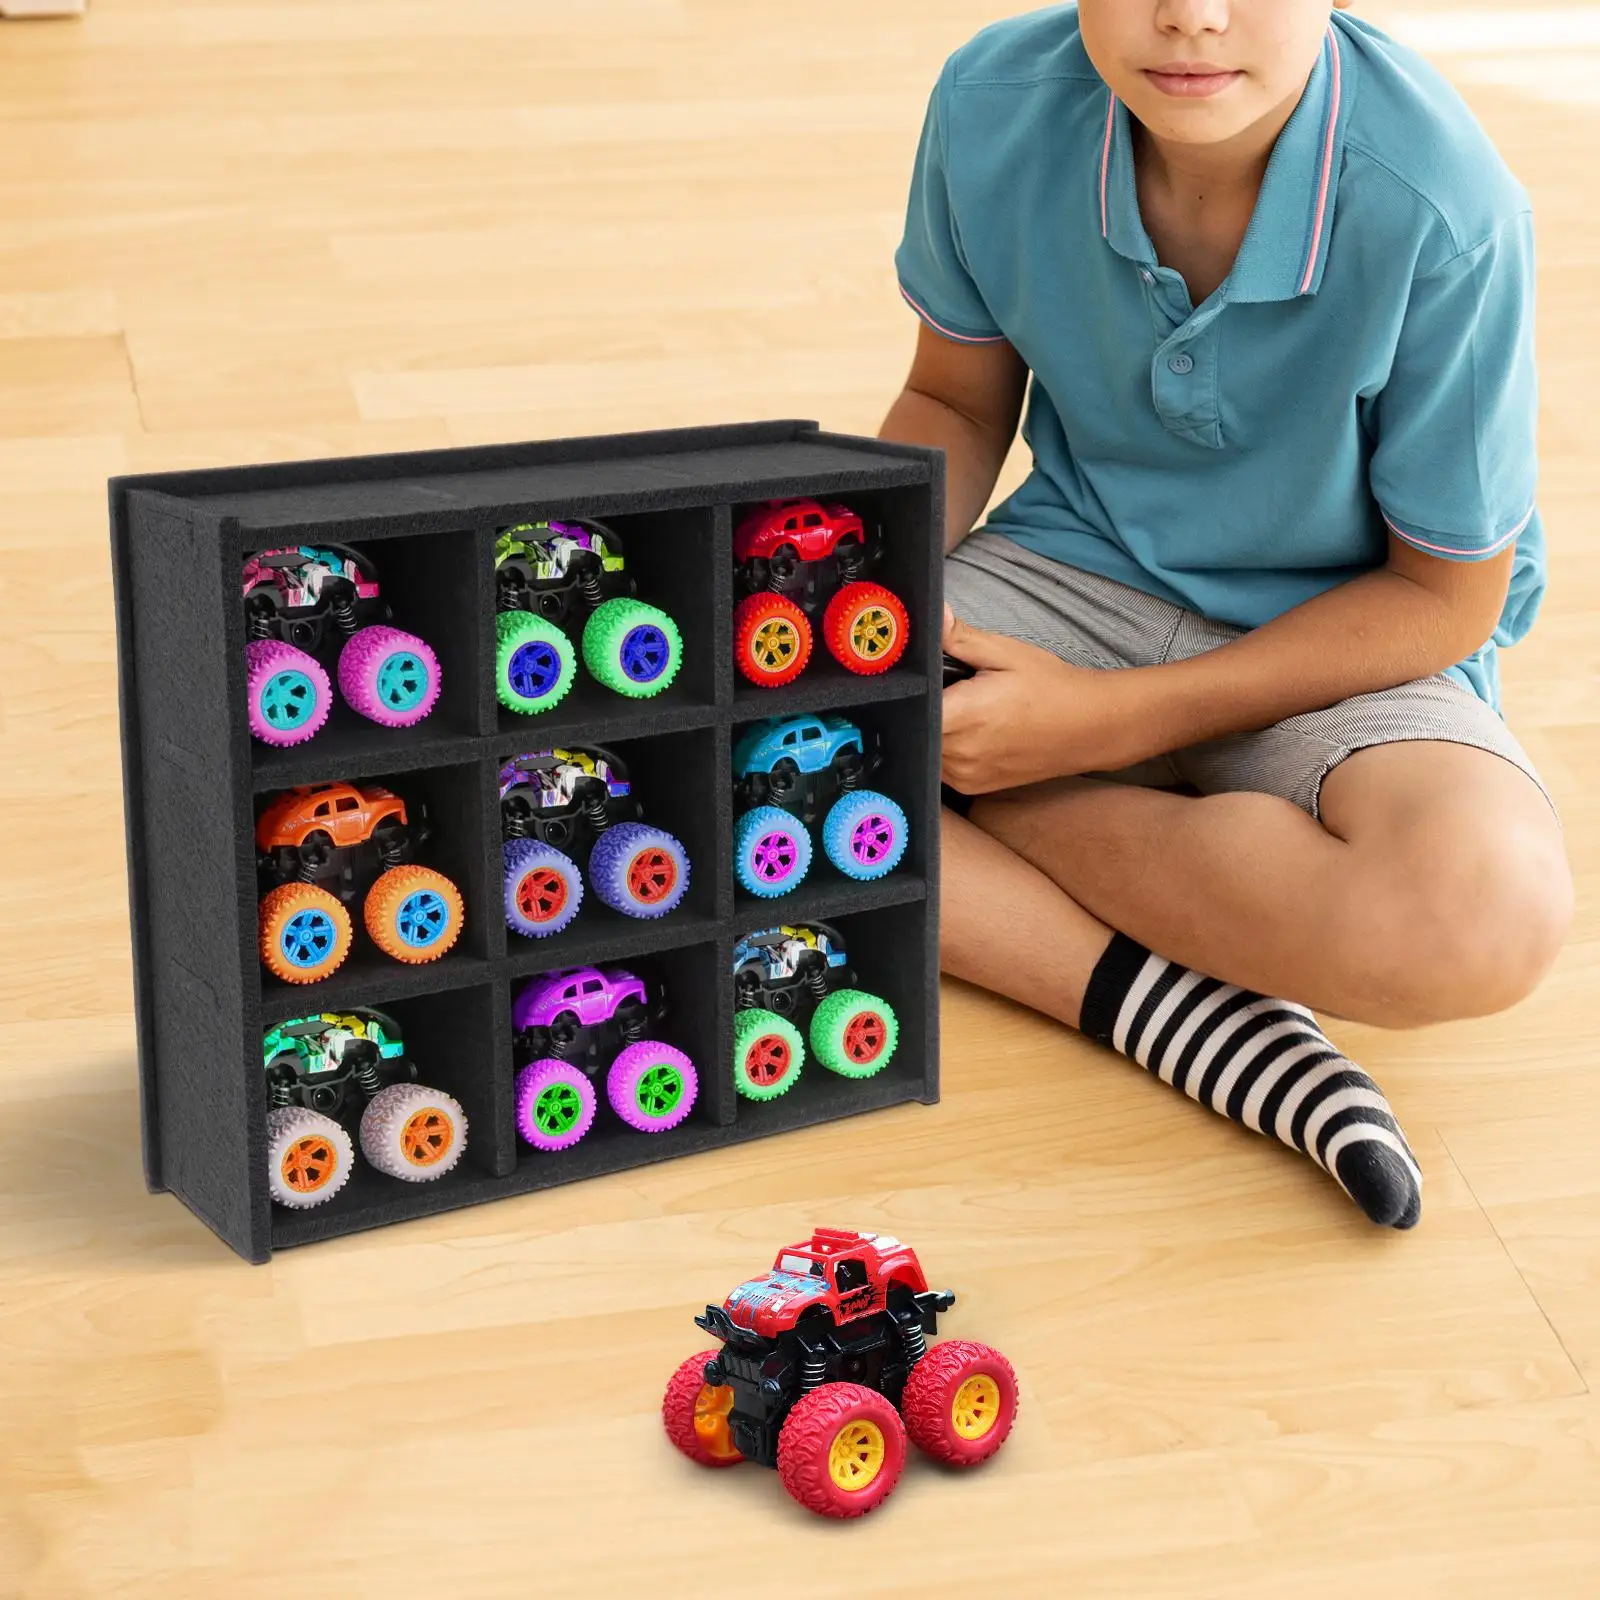 Monster Trucks Toy Wall Mounted Display Case with 9 Slots DIY Assembled Felt Material for Displaying Multifunctional Accessories